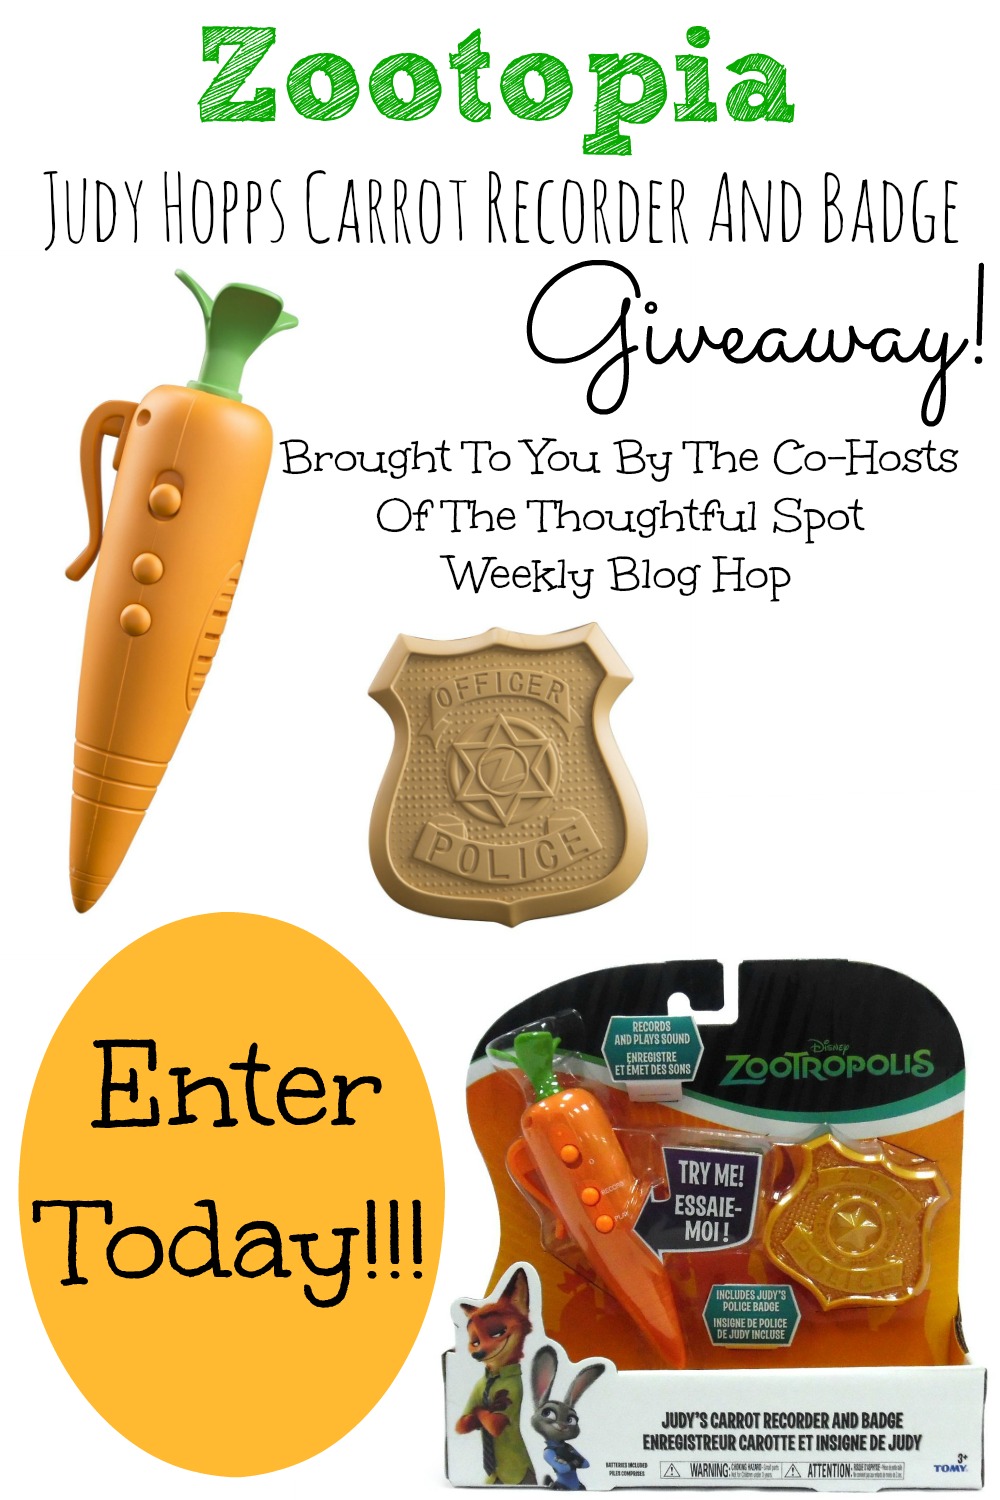 Thoughtful Spot Weekly Blog Hop Giveaway Zootopia